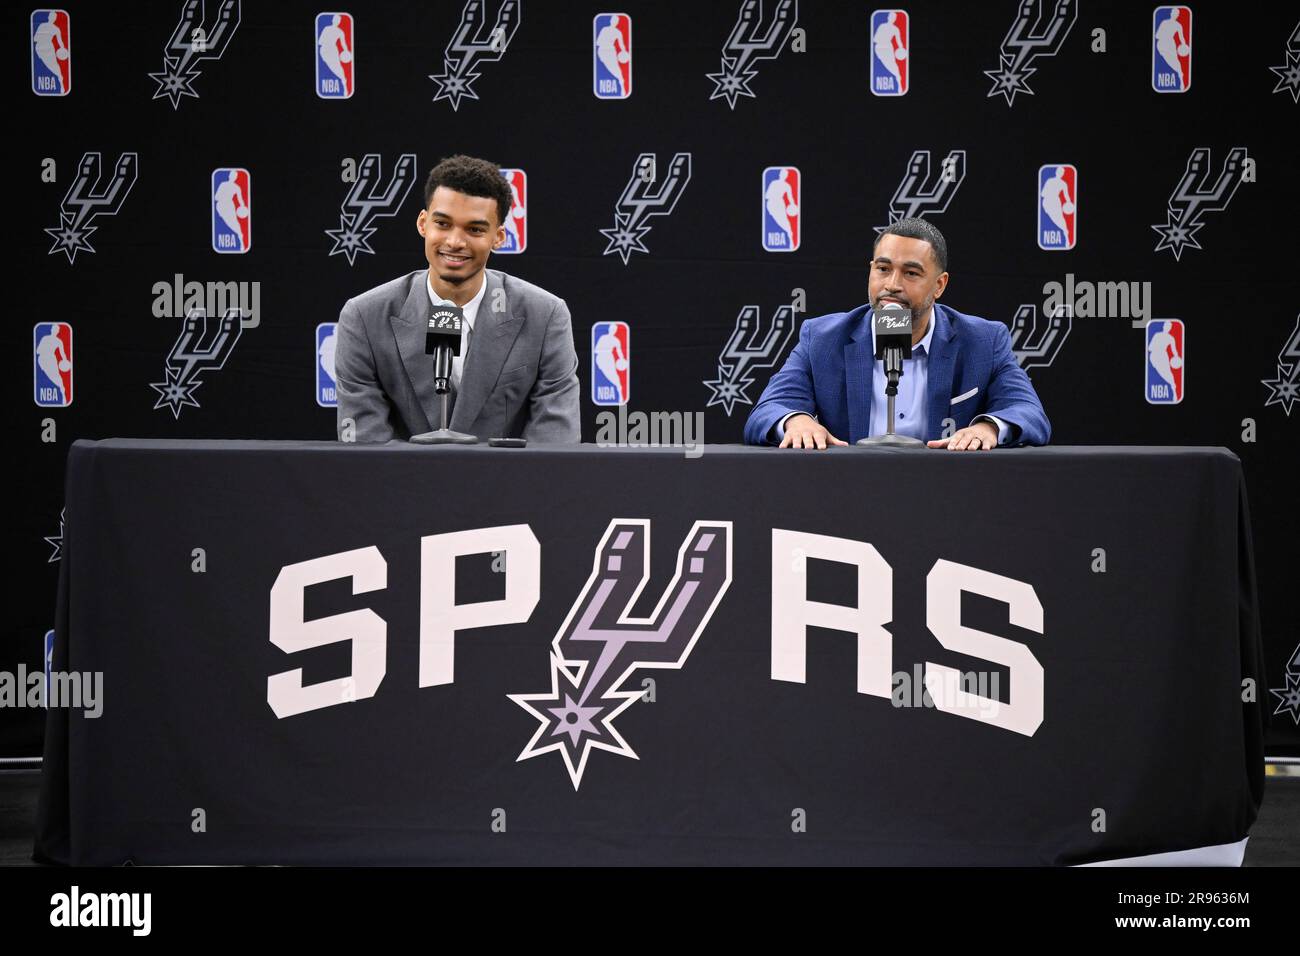 San Antonio Spurs on X: The newest members of the Spurs Family